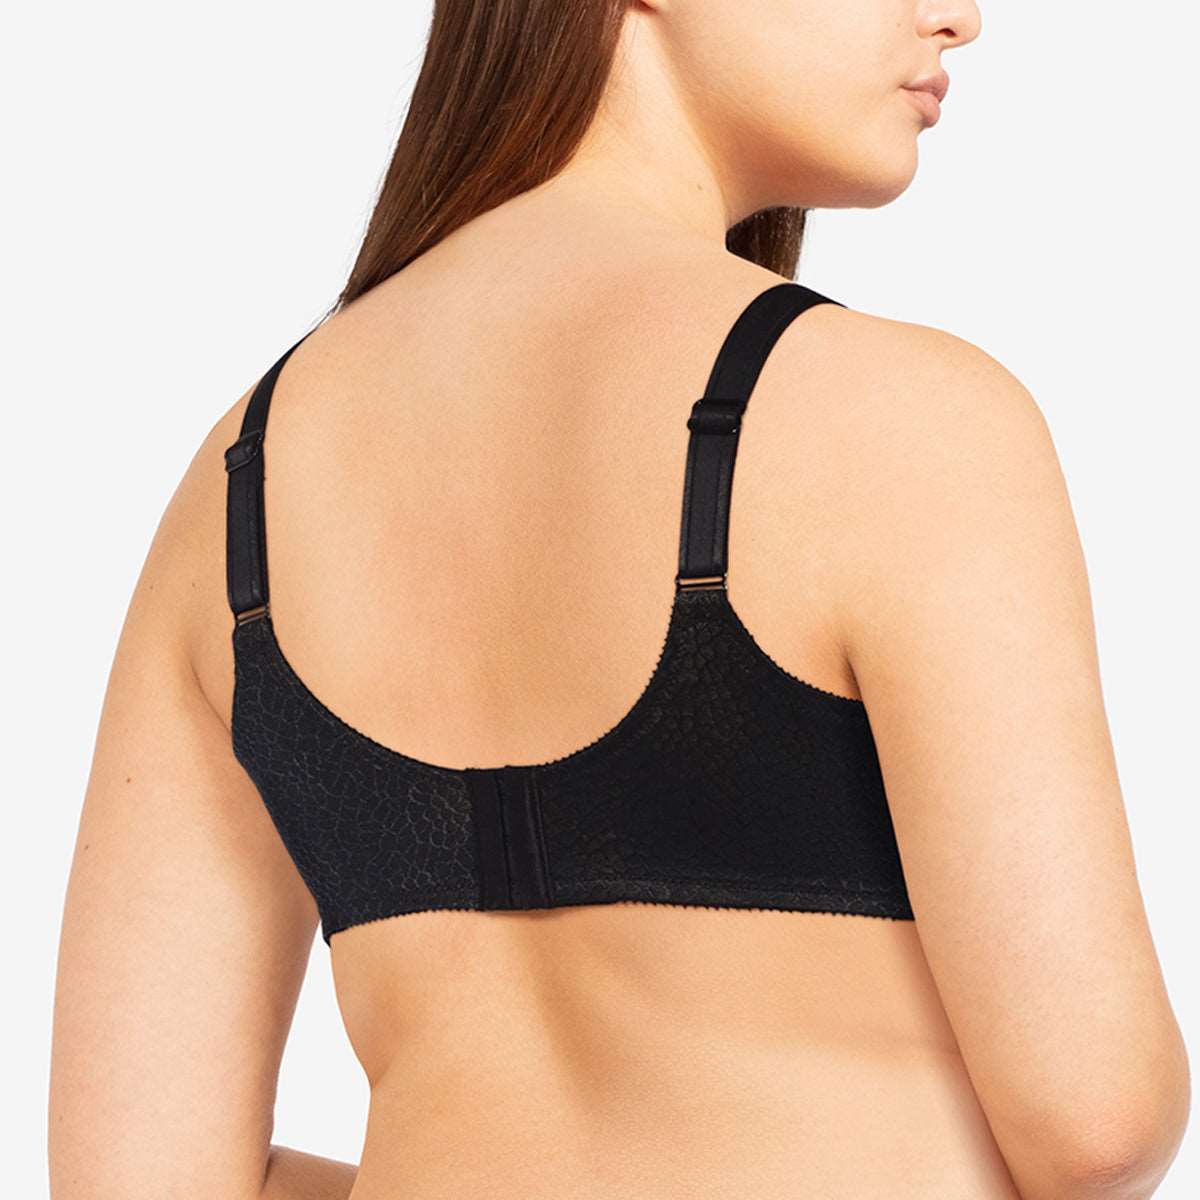 Chantelle bra 1891 C Magnaifique Full Cup Bra in black how should a bra fit french lingerie canada toronto linea intima